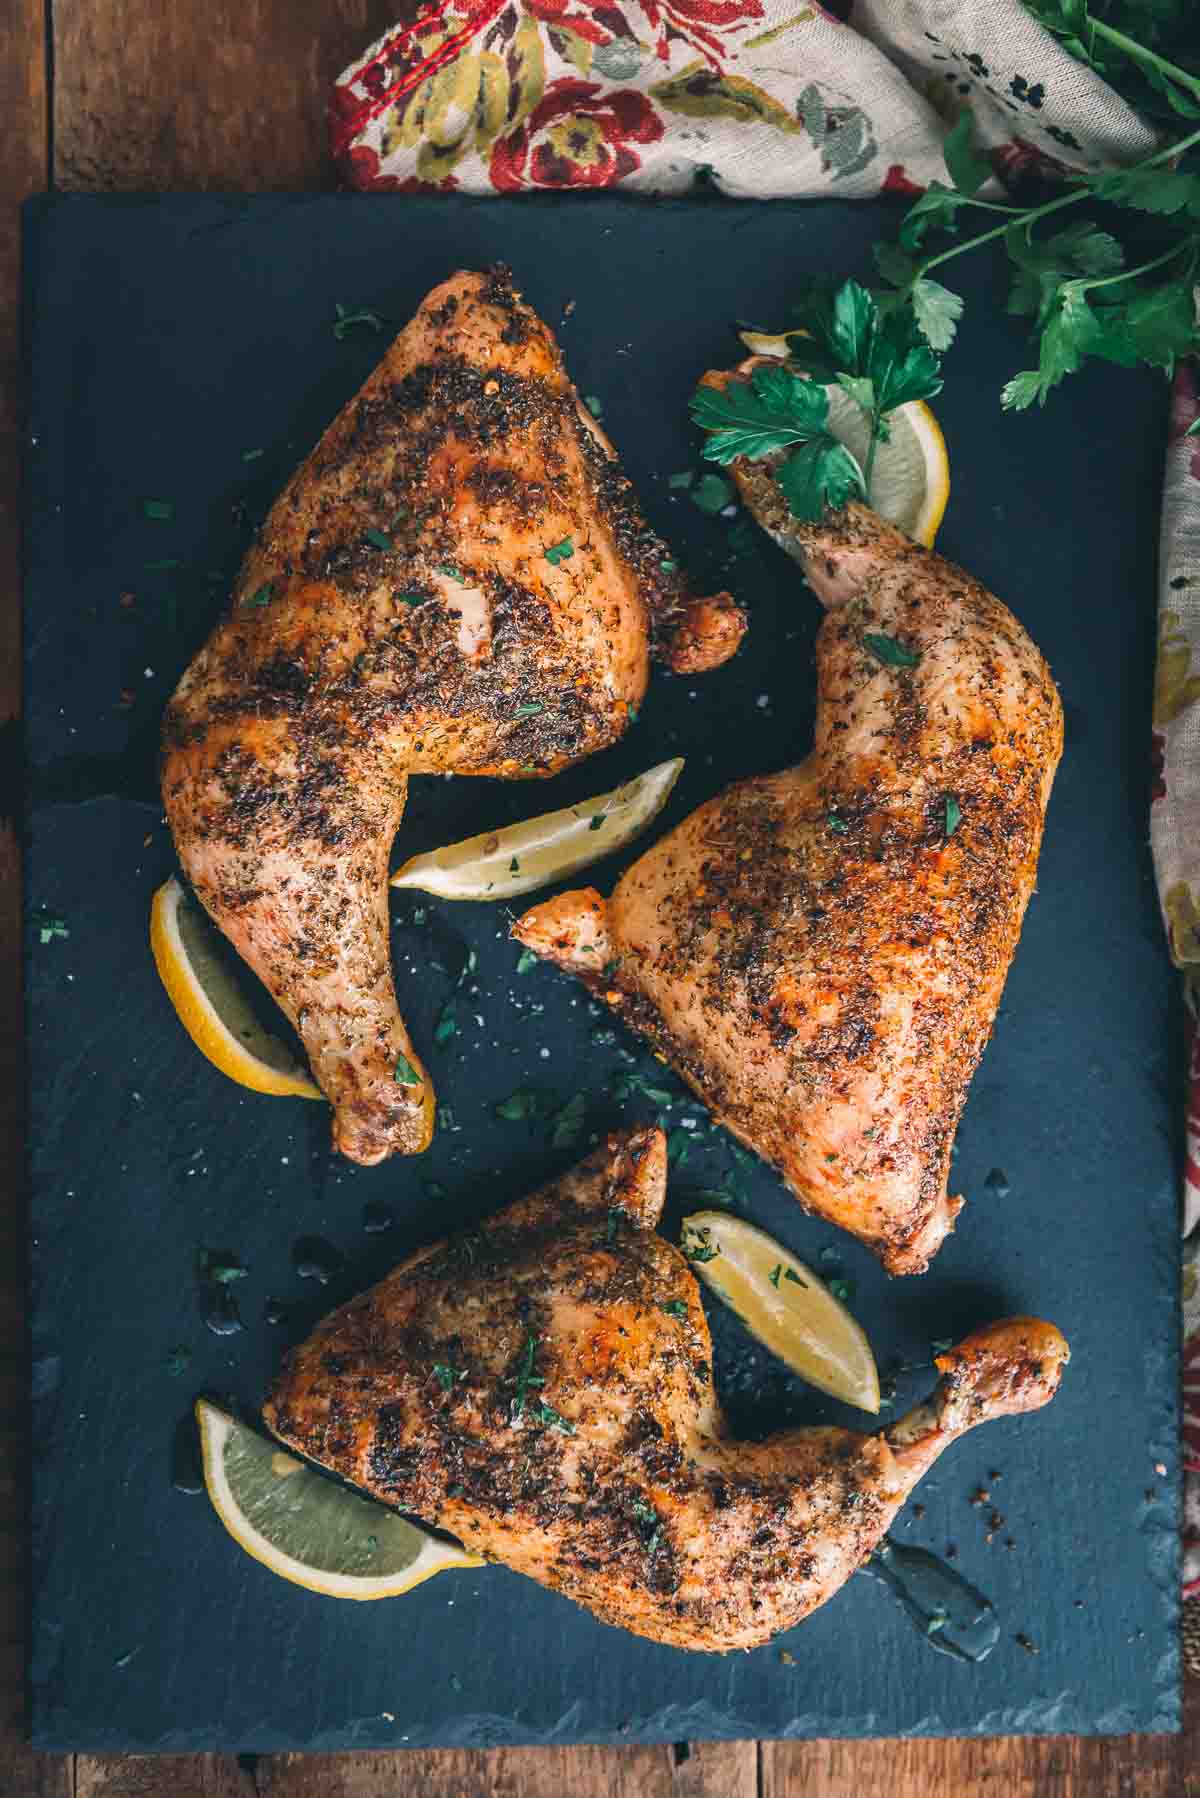 Overhead image of golden brown chicken quarters with crispy skin on a black serving plate.